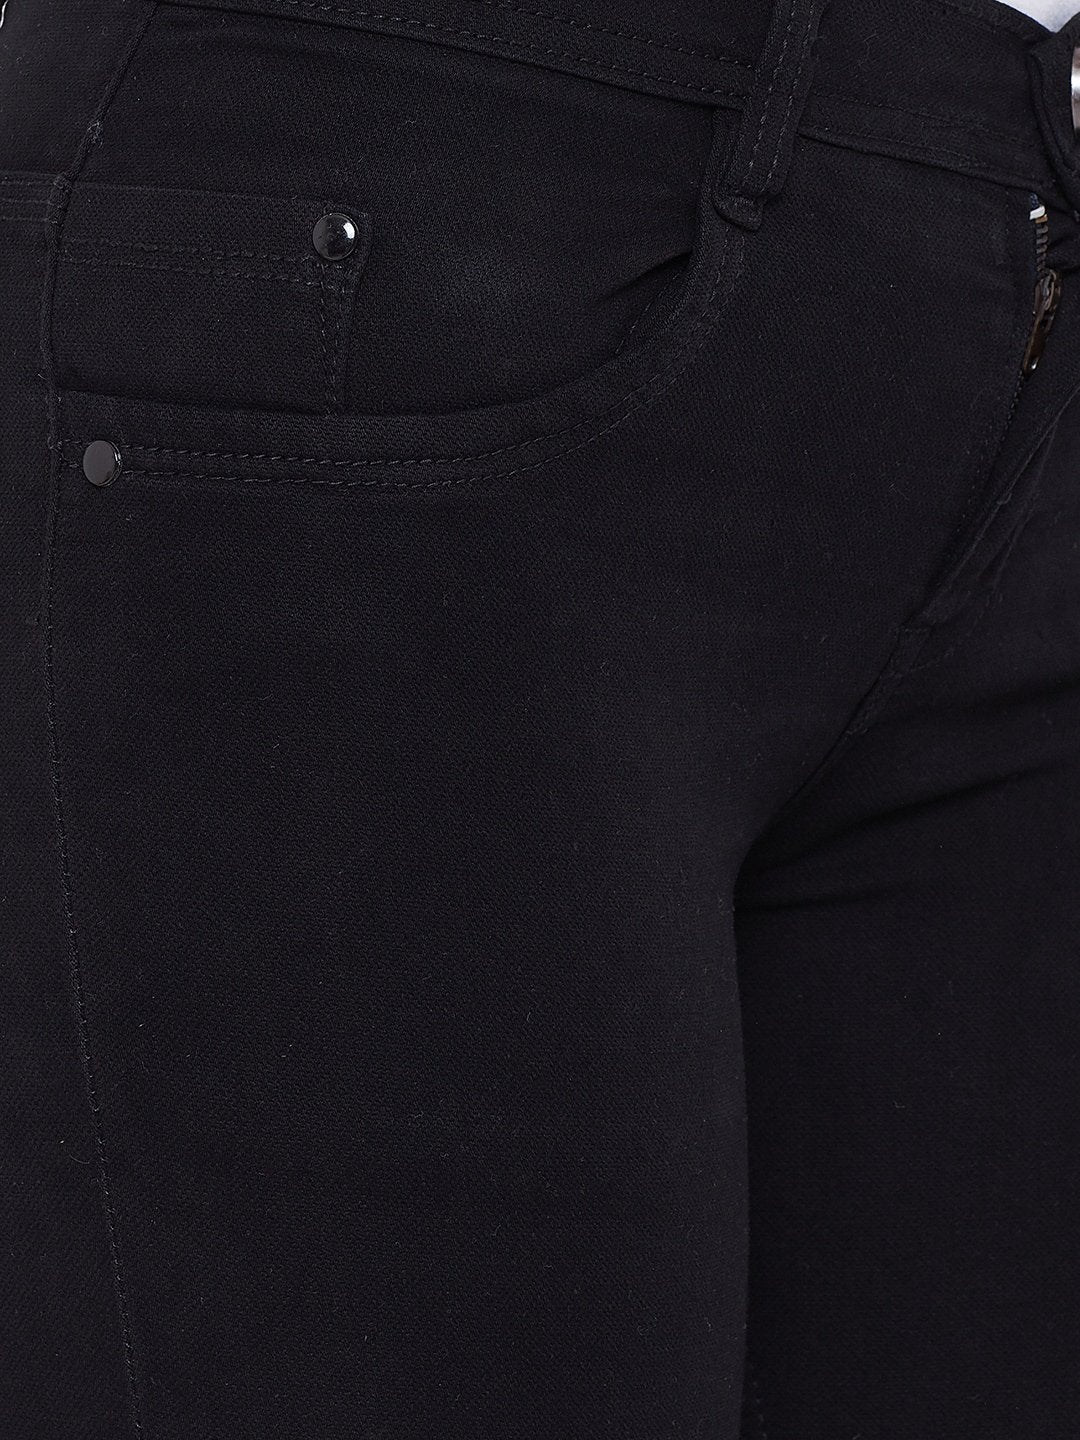 Slim Fit Stretchable Black Shorts - NiftyJeans